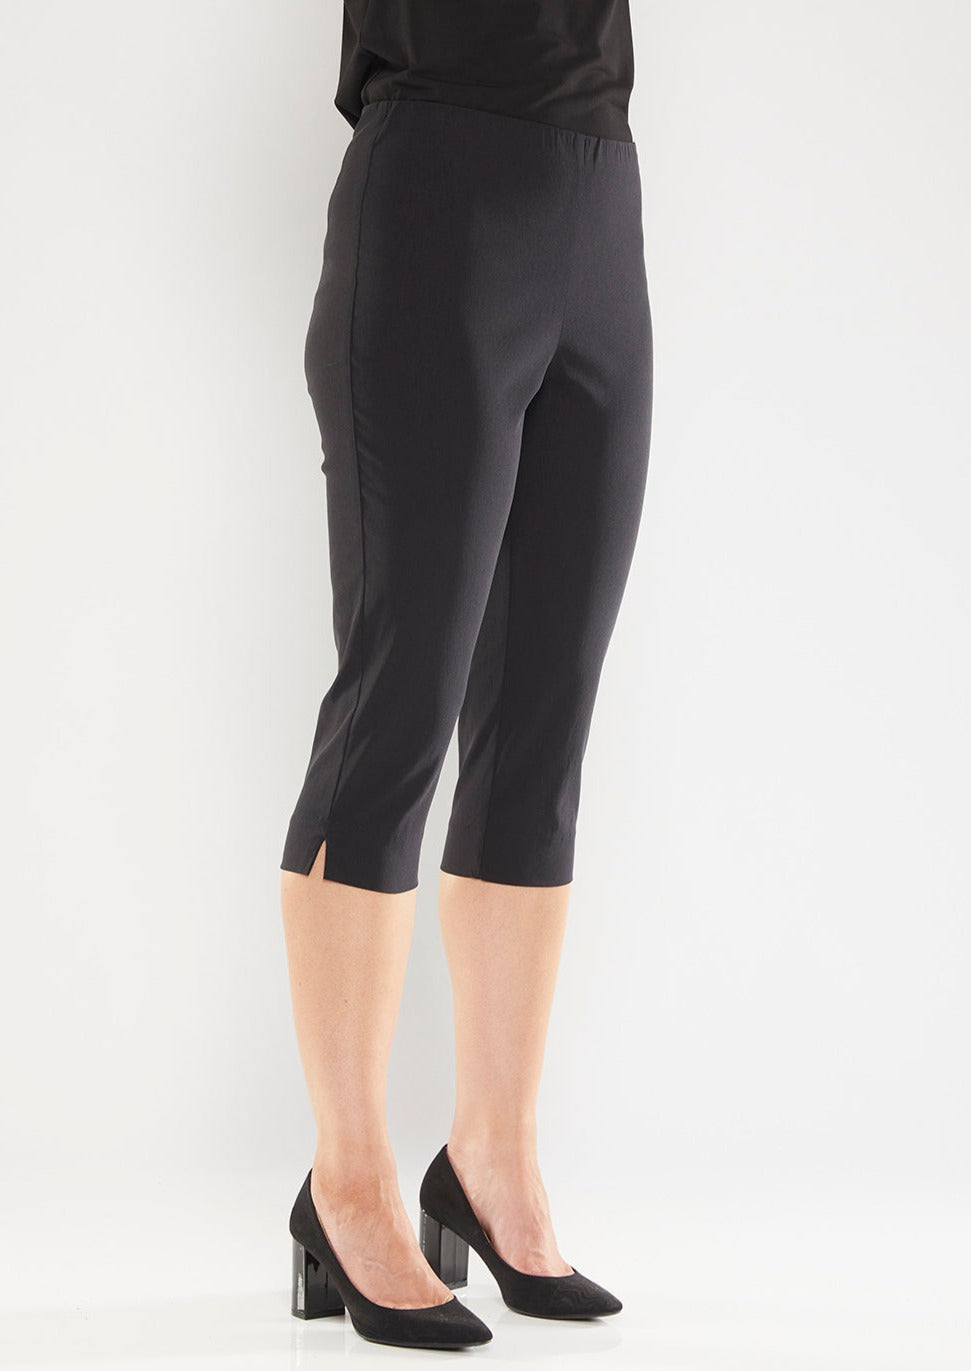 The black Capri feature a below the knee-length pull on style, elasticated waist and slim cut leg. Image is model is standing at a front angle. Philosophy Australia bengaline knee length pant.